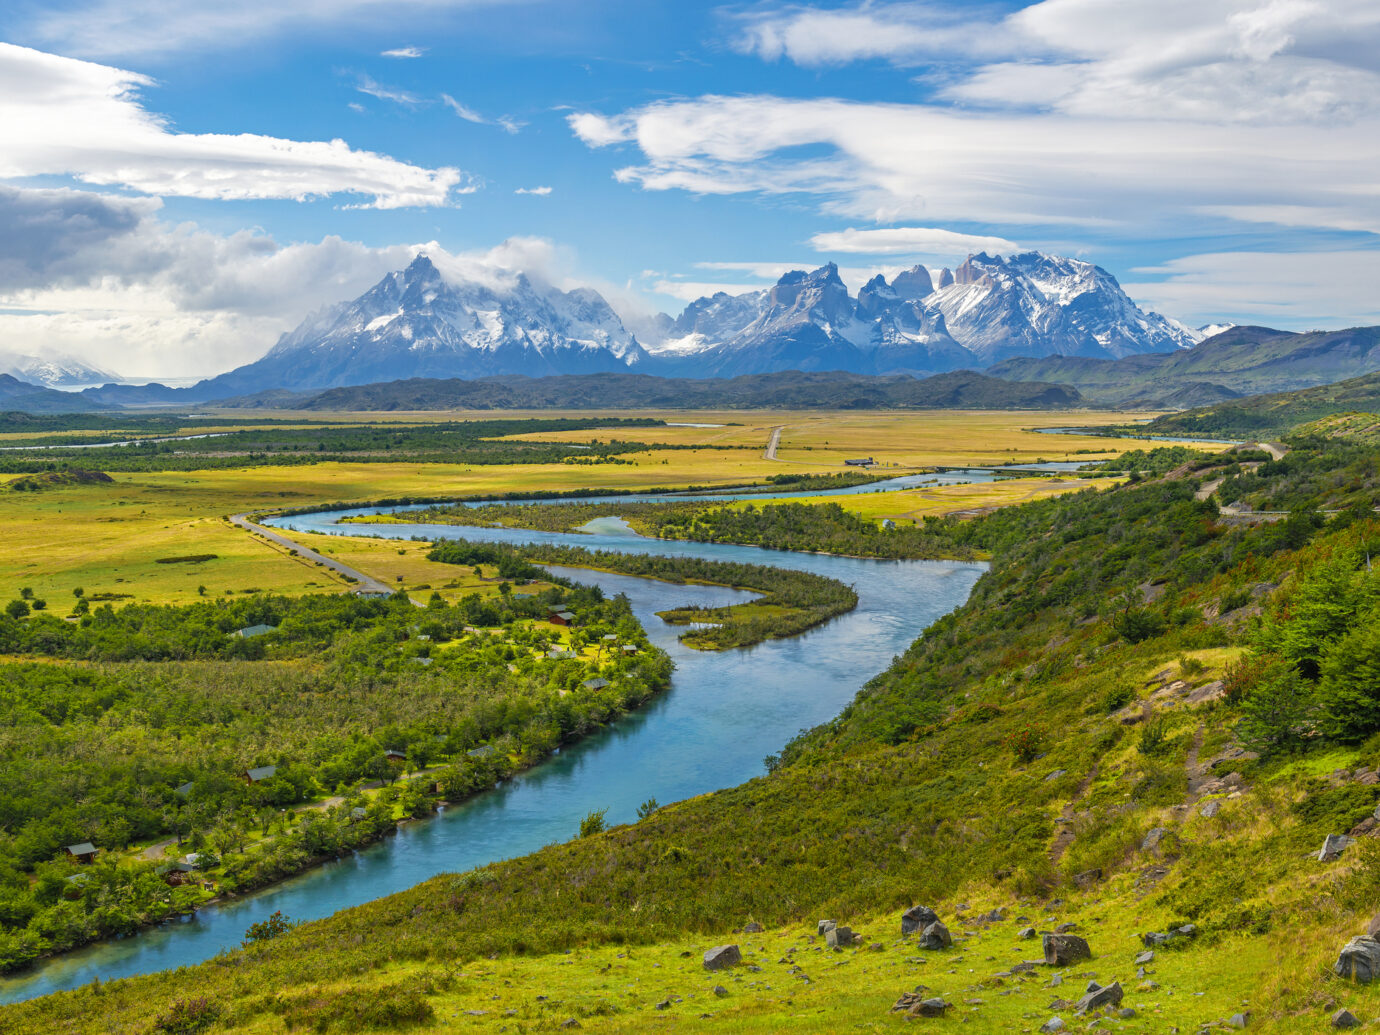 The Andes peaks of Paine Grande, Cuernos del Paine and Torres del Paine on a summer day